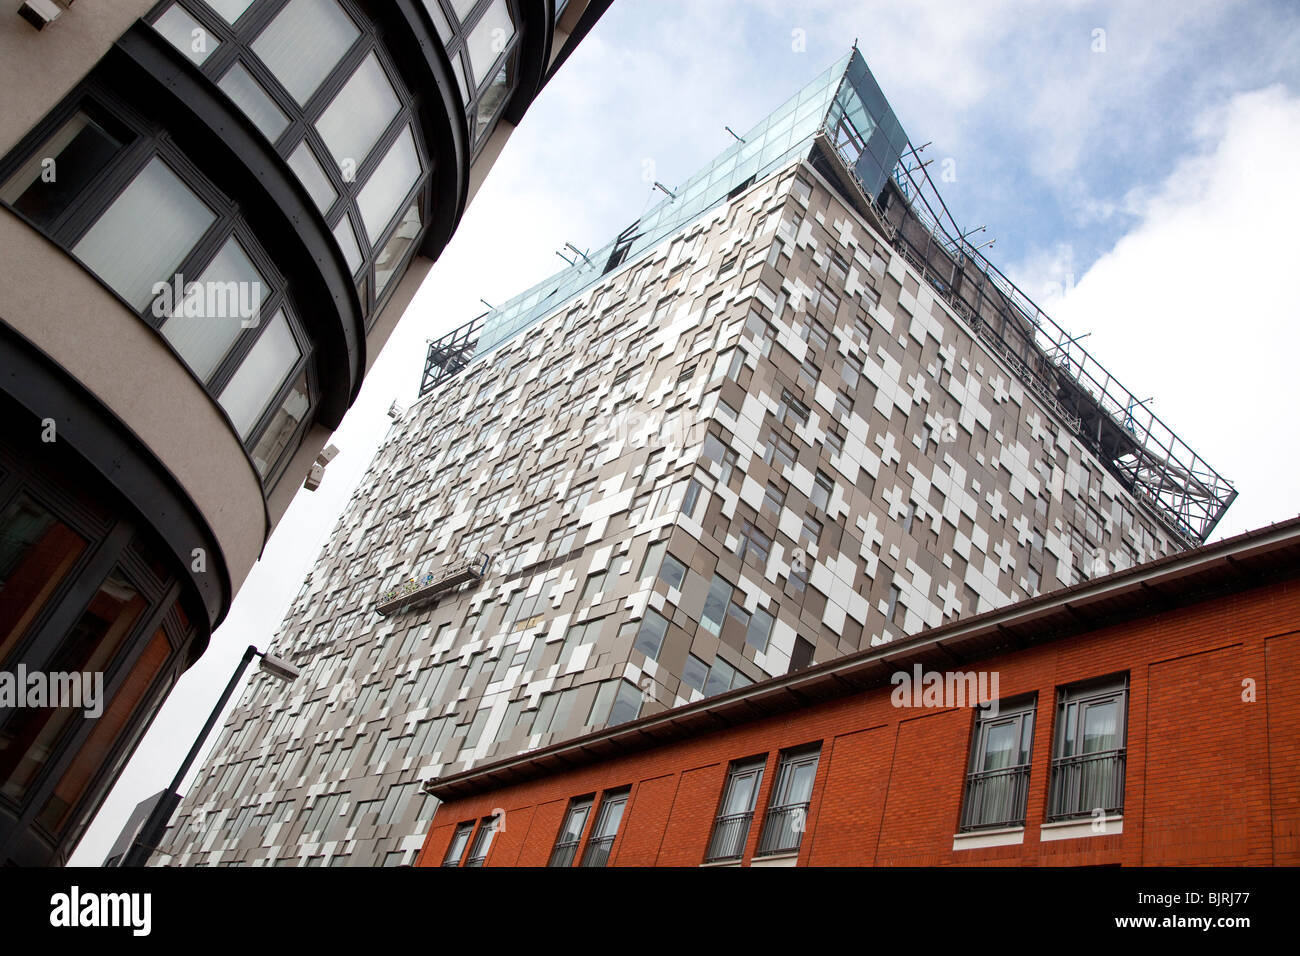 The new Cube building in the centre of Birmingham, England, UK Stock Photo